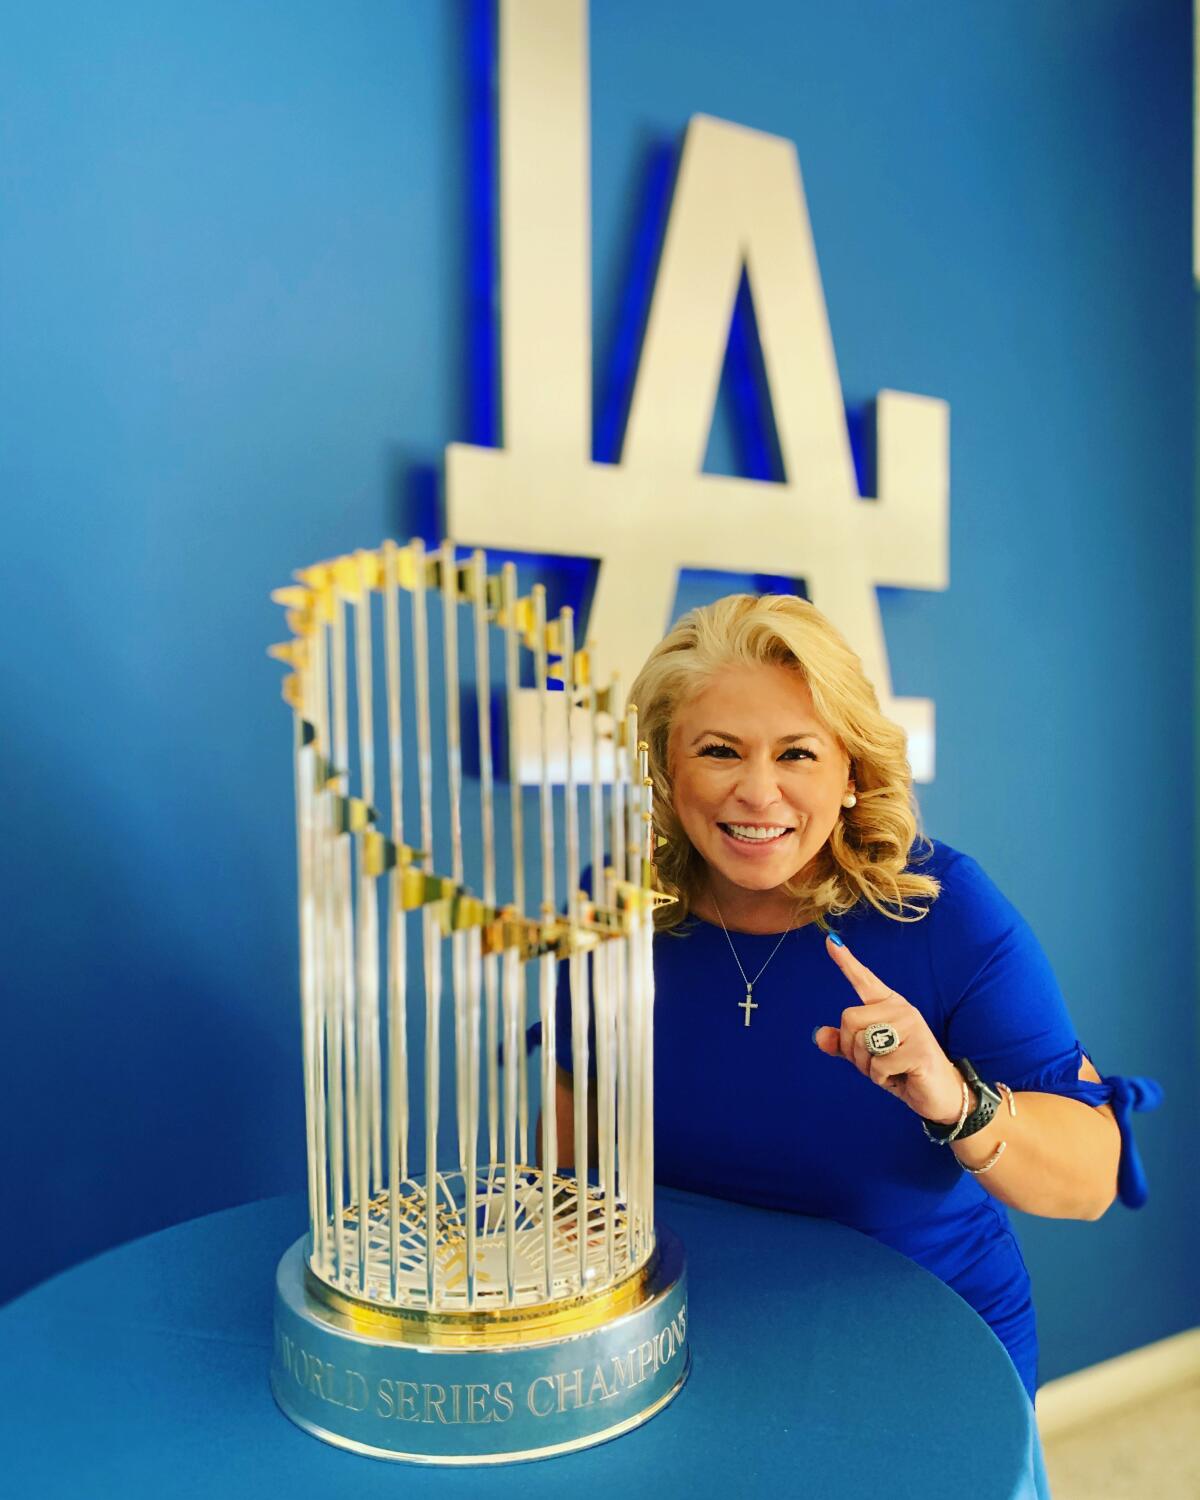 Dodgers Countdown To Mexican Heritage Day - East L.A. Sports Scene